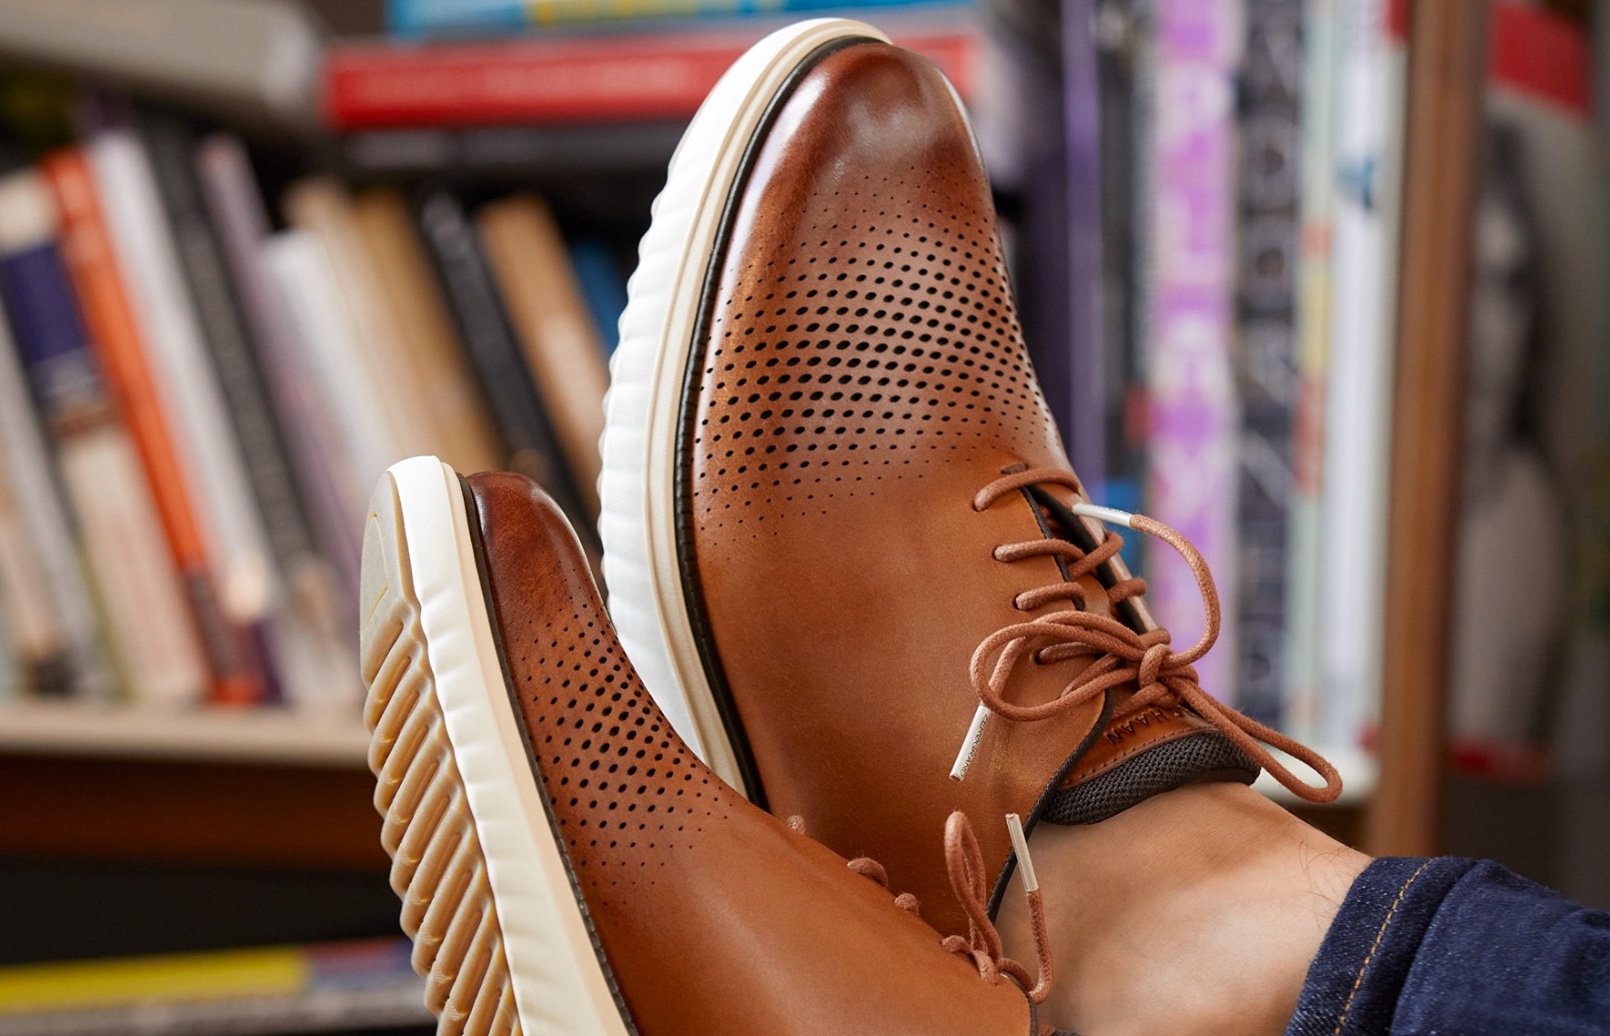 Cole Haan Buy Now Wear Sale takes up to 60% off hundreds of styles + 30% off work-ready - 9to5Toys